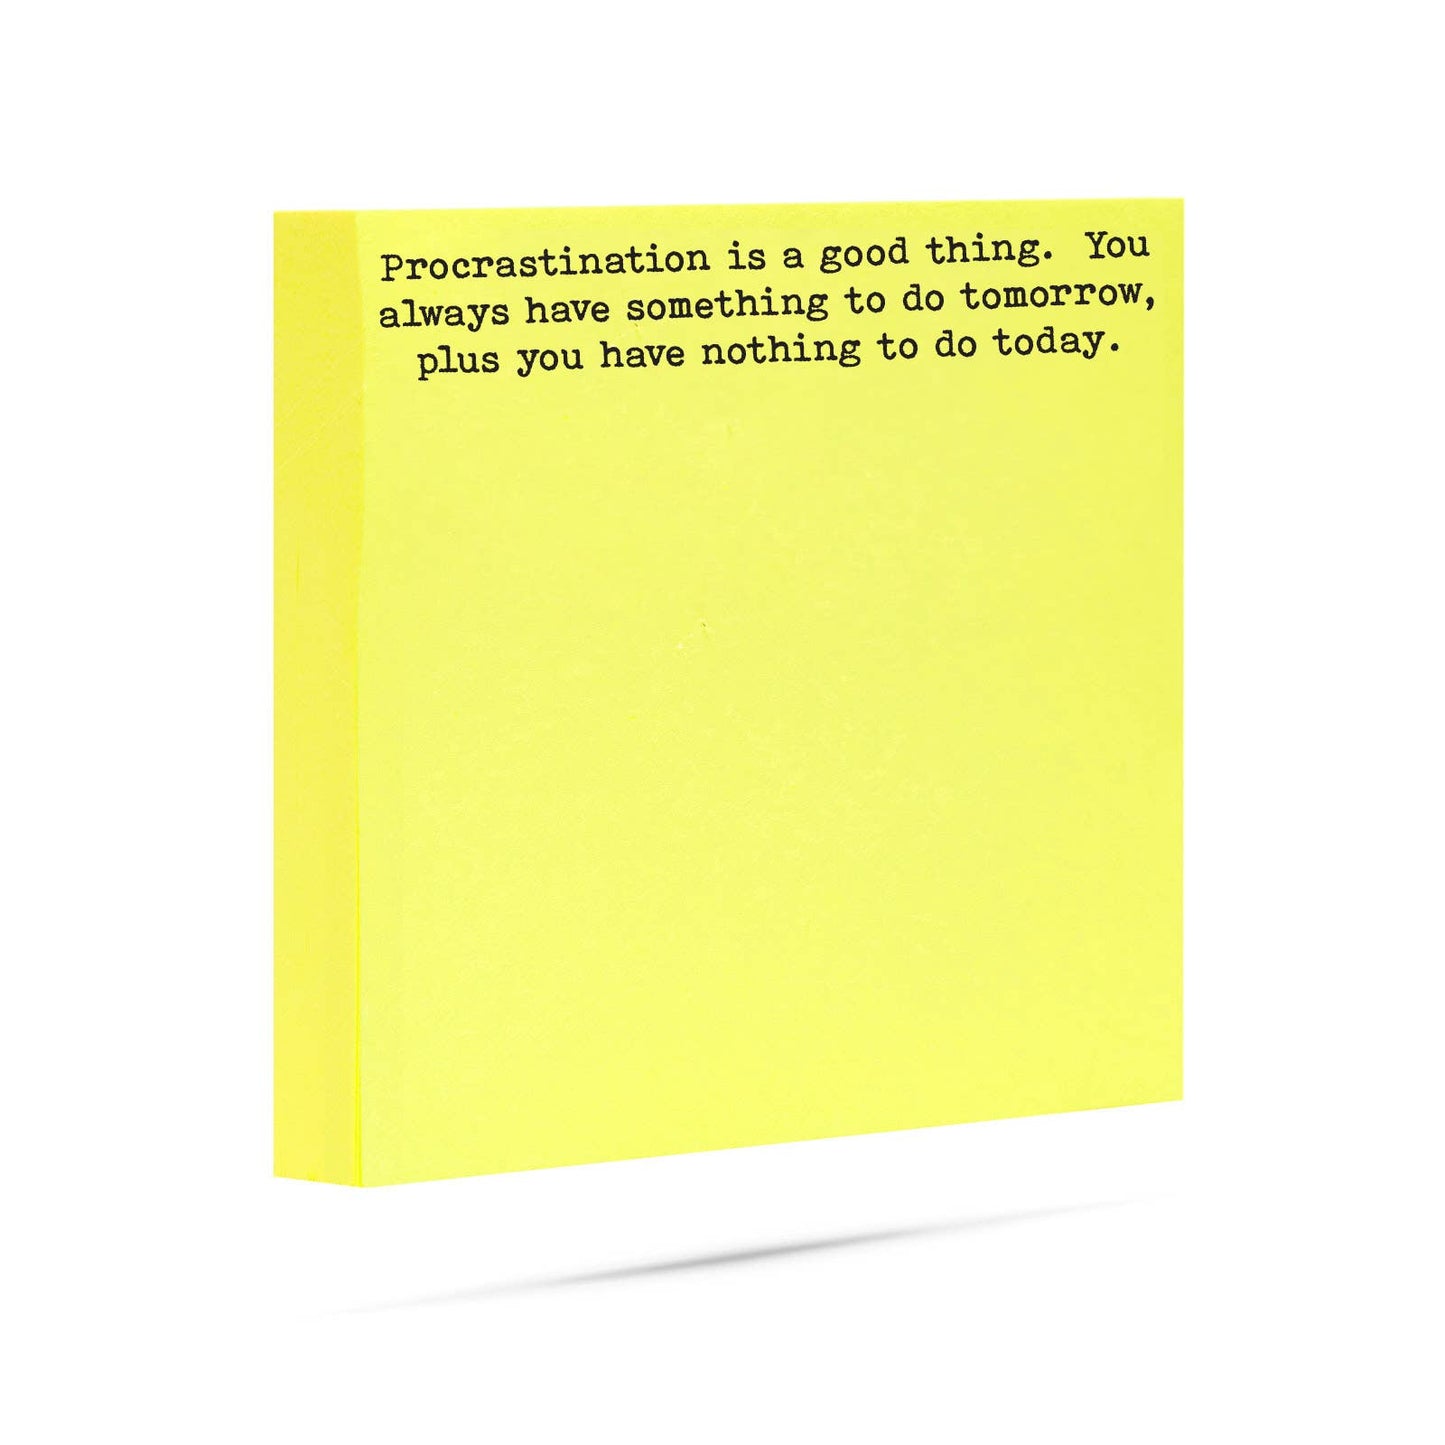 ellembee gift - Procrastination is a good thing |  sticky notes with sayings